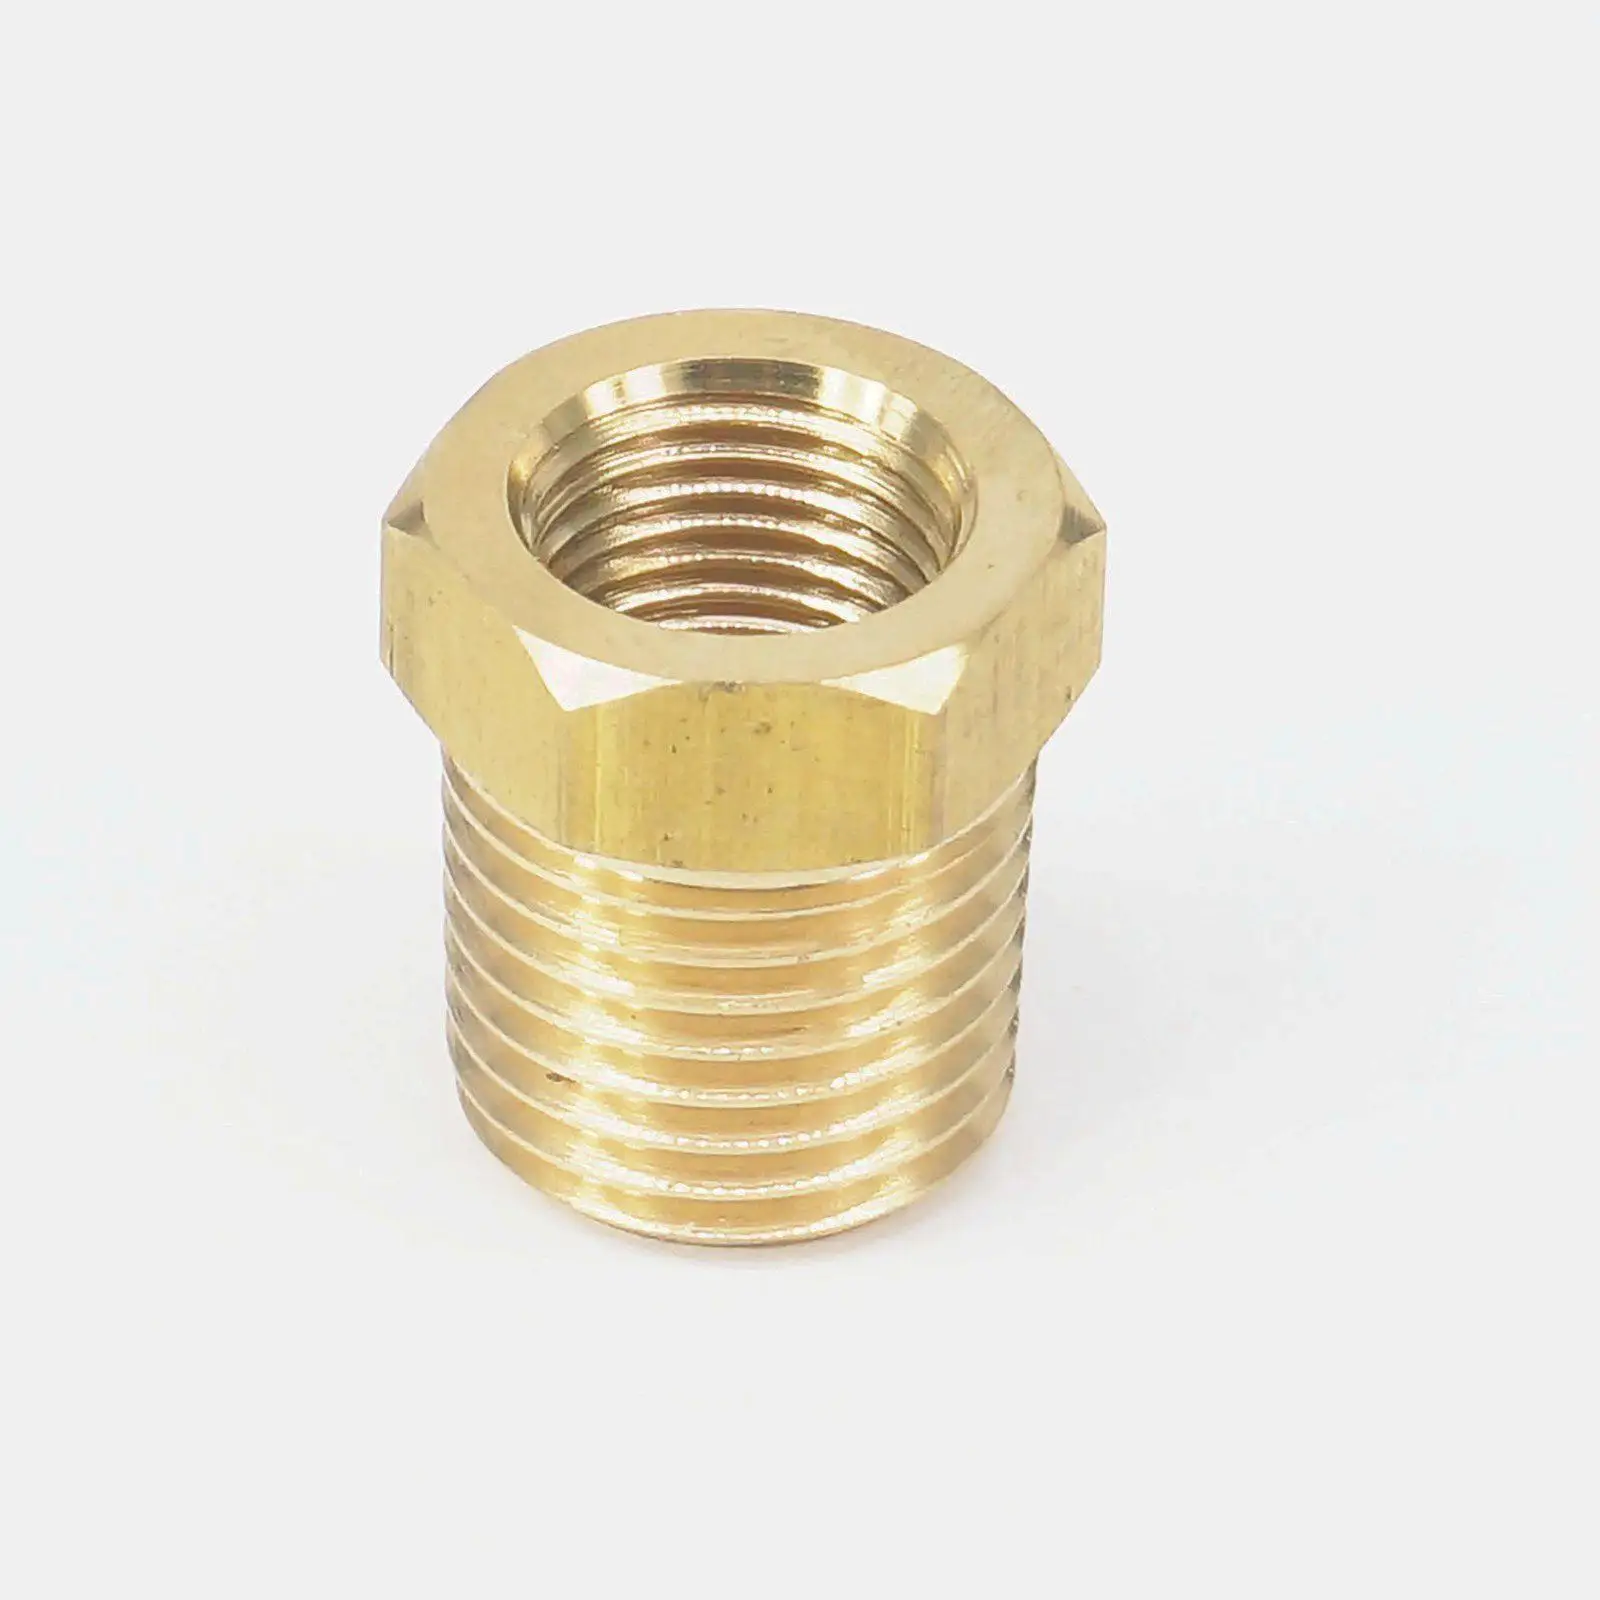 BSP TAPER THREAD x HOSE TAIL END CONNECTOR WATER & FUEL BRASS FITTING FOR AIR 